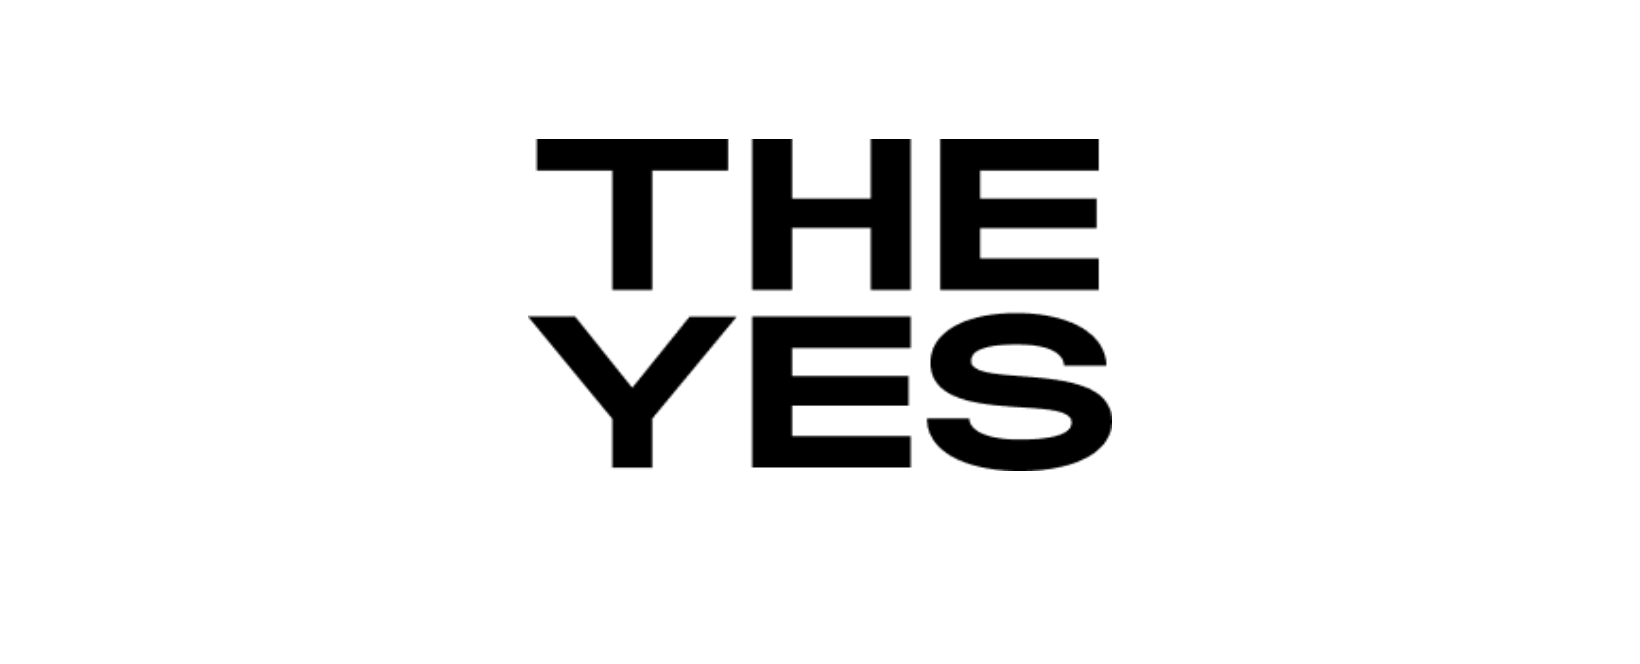 THE YES Discount Code 2022